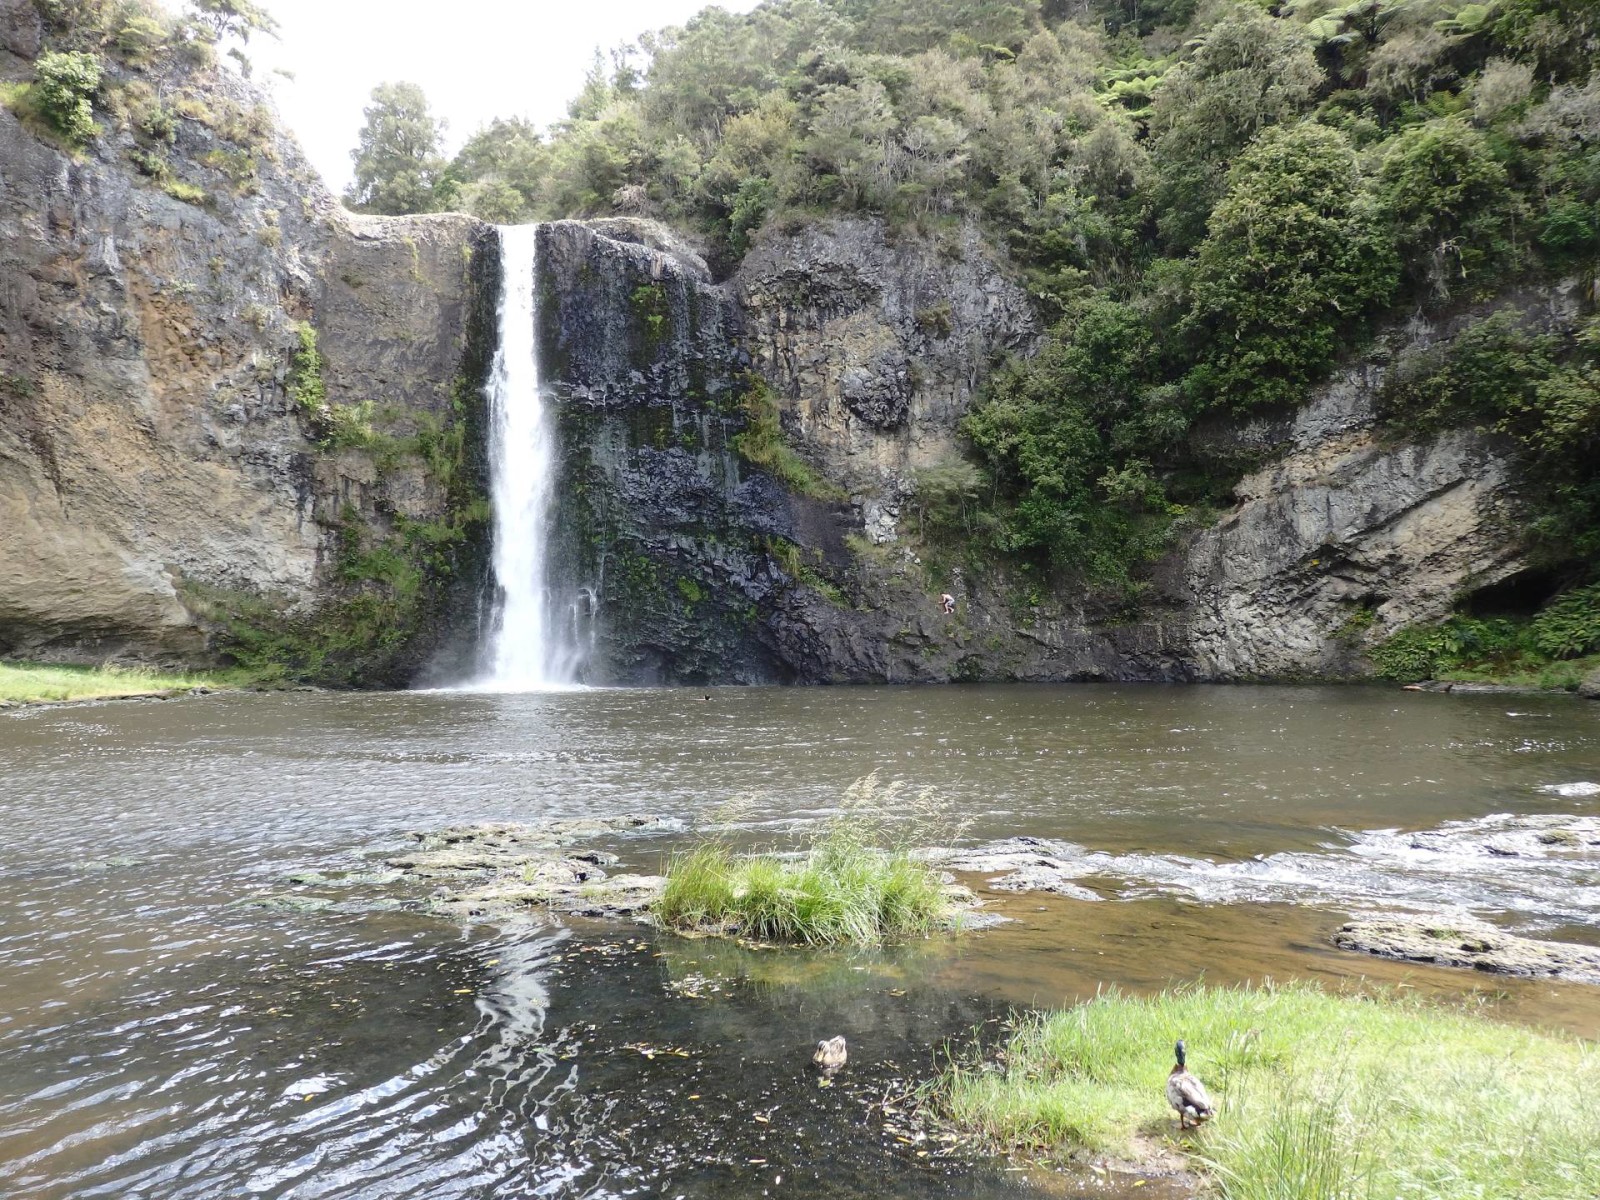 New Zealand Travel InspirationLooking for things to do in Auckland City then why not visit the Hunua Falls in South Auckland which is a super little New Zealand hiking spot and a gorgeous waterfall. Add this Regional Park to your New Zealand Bucket List. Click on the link to see more photos and travel tips for Auckland, New Zealand.